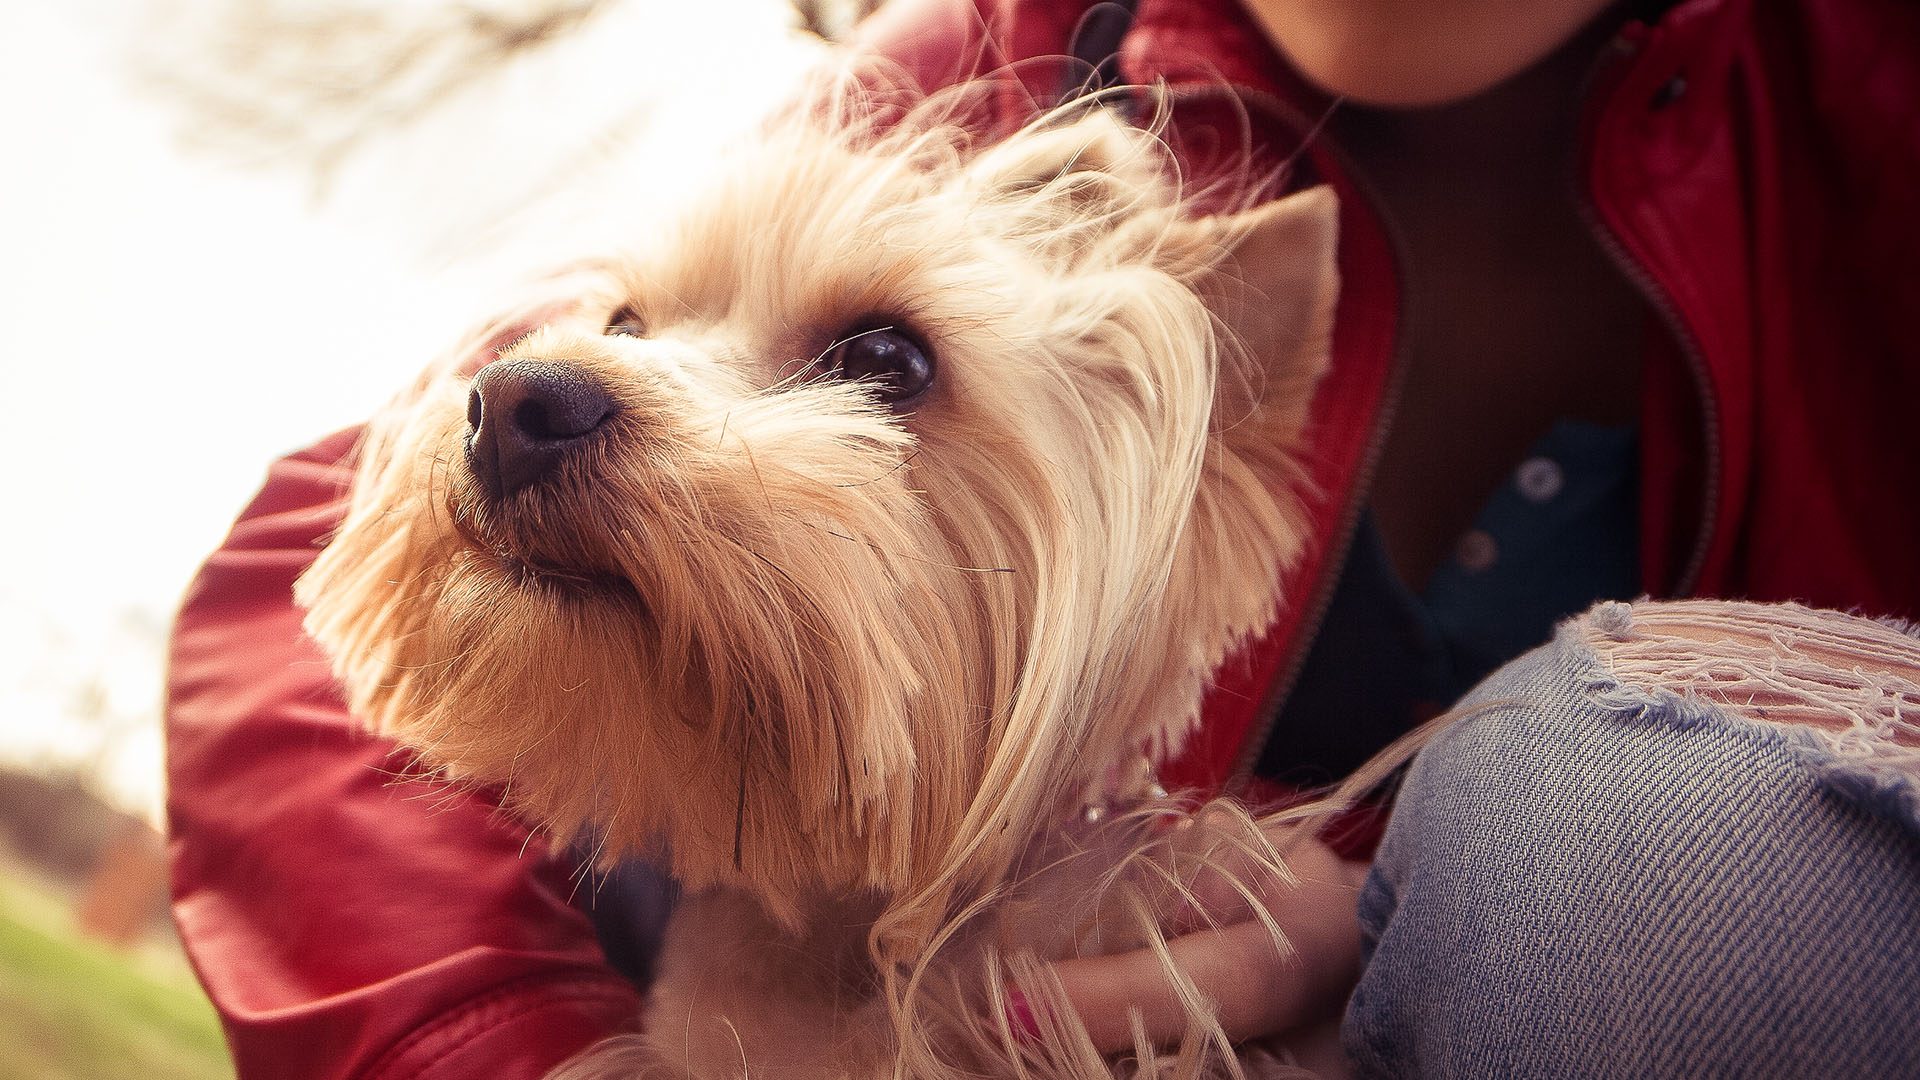 6 Unexpected Ways Your Dog Can Help You Save Money